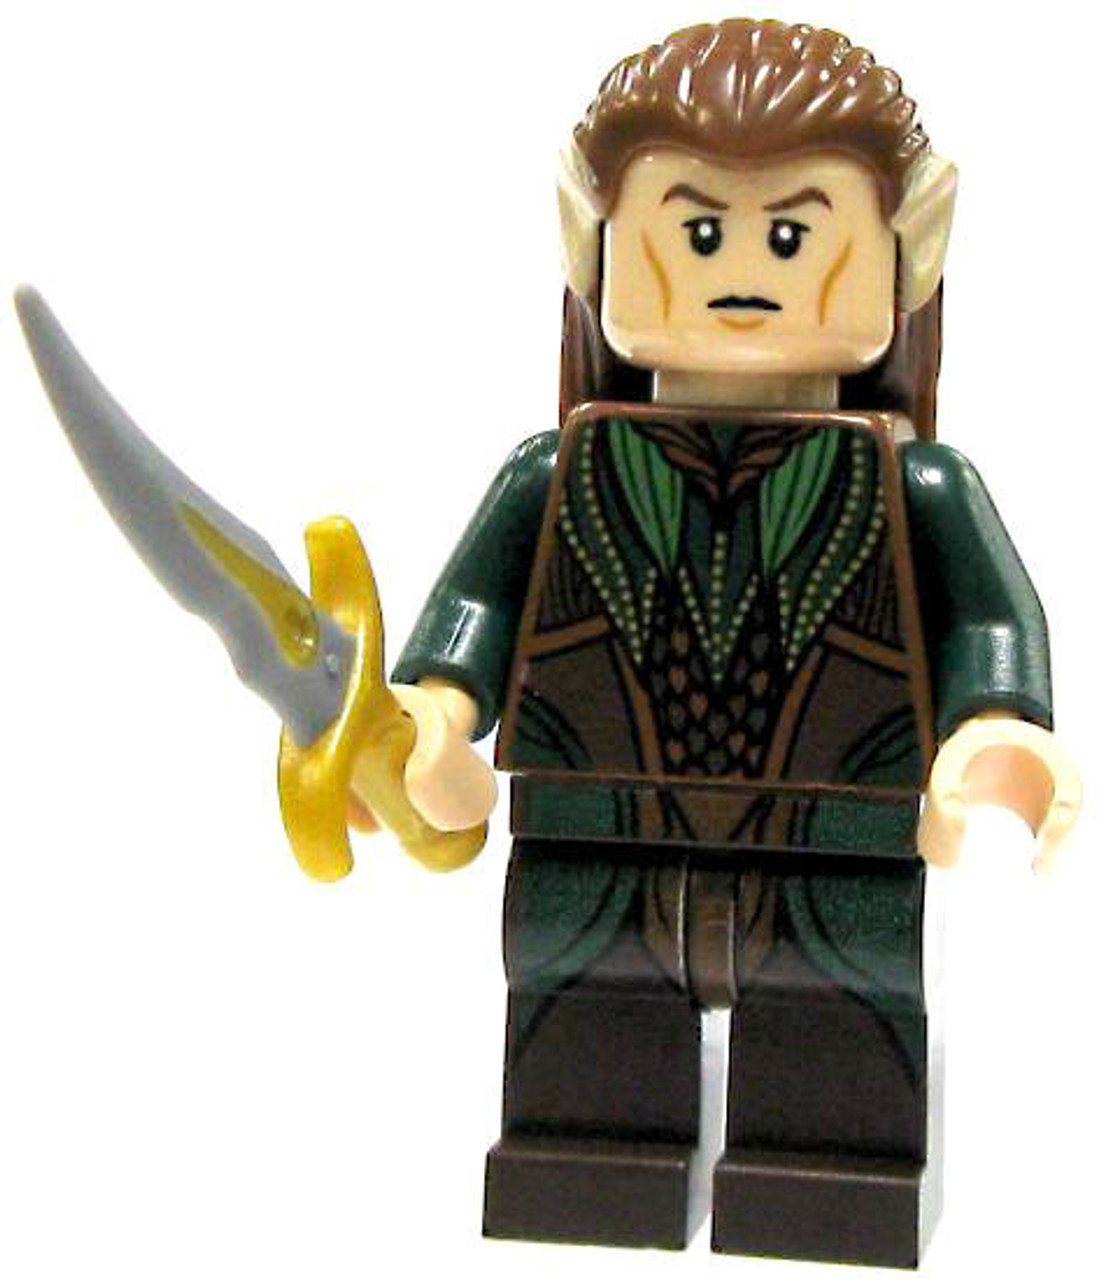 LEGO The Hobbit Gundabad Orc with sword MINIFIG new from Lego set #79017